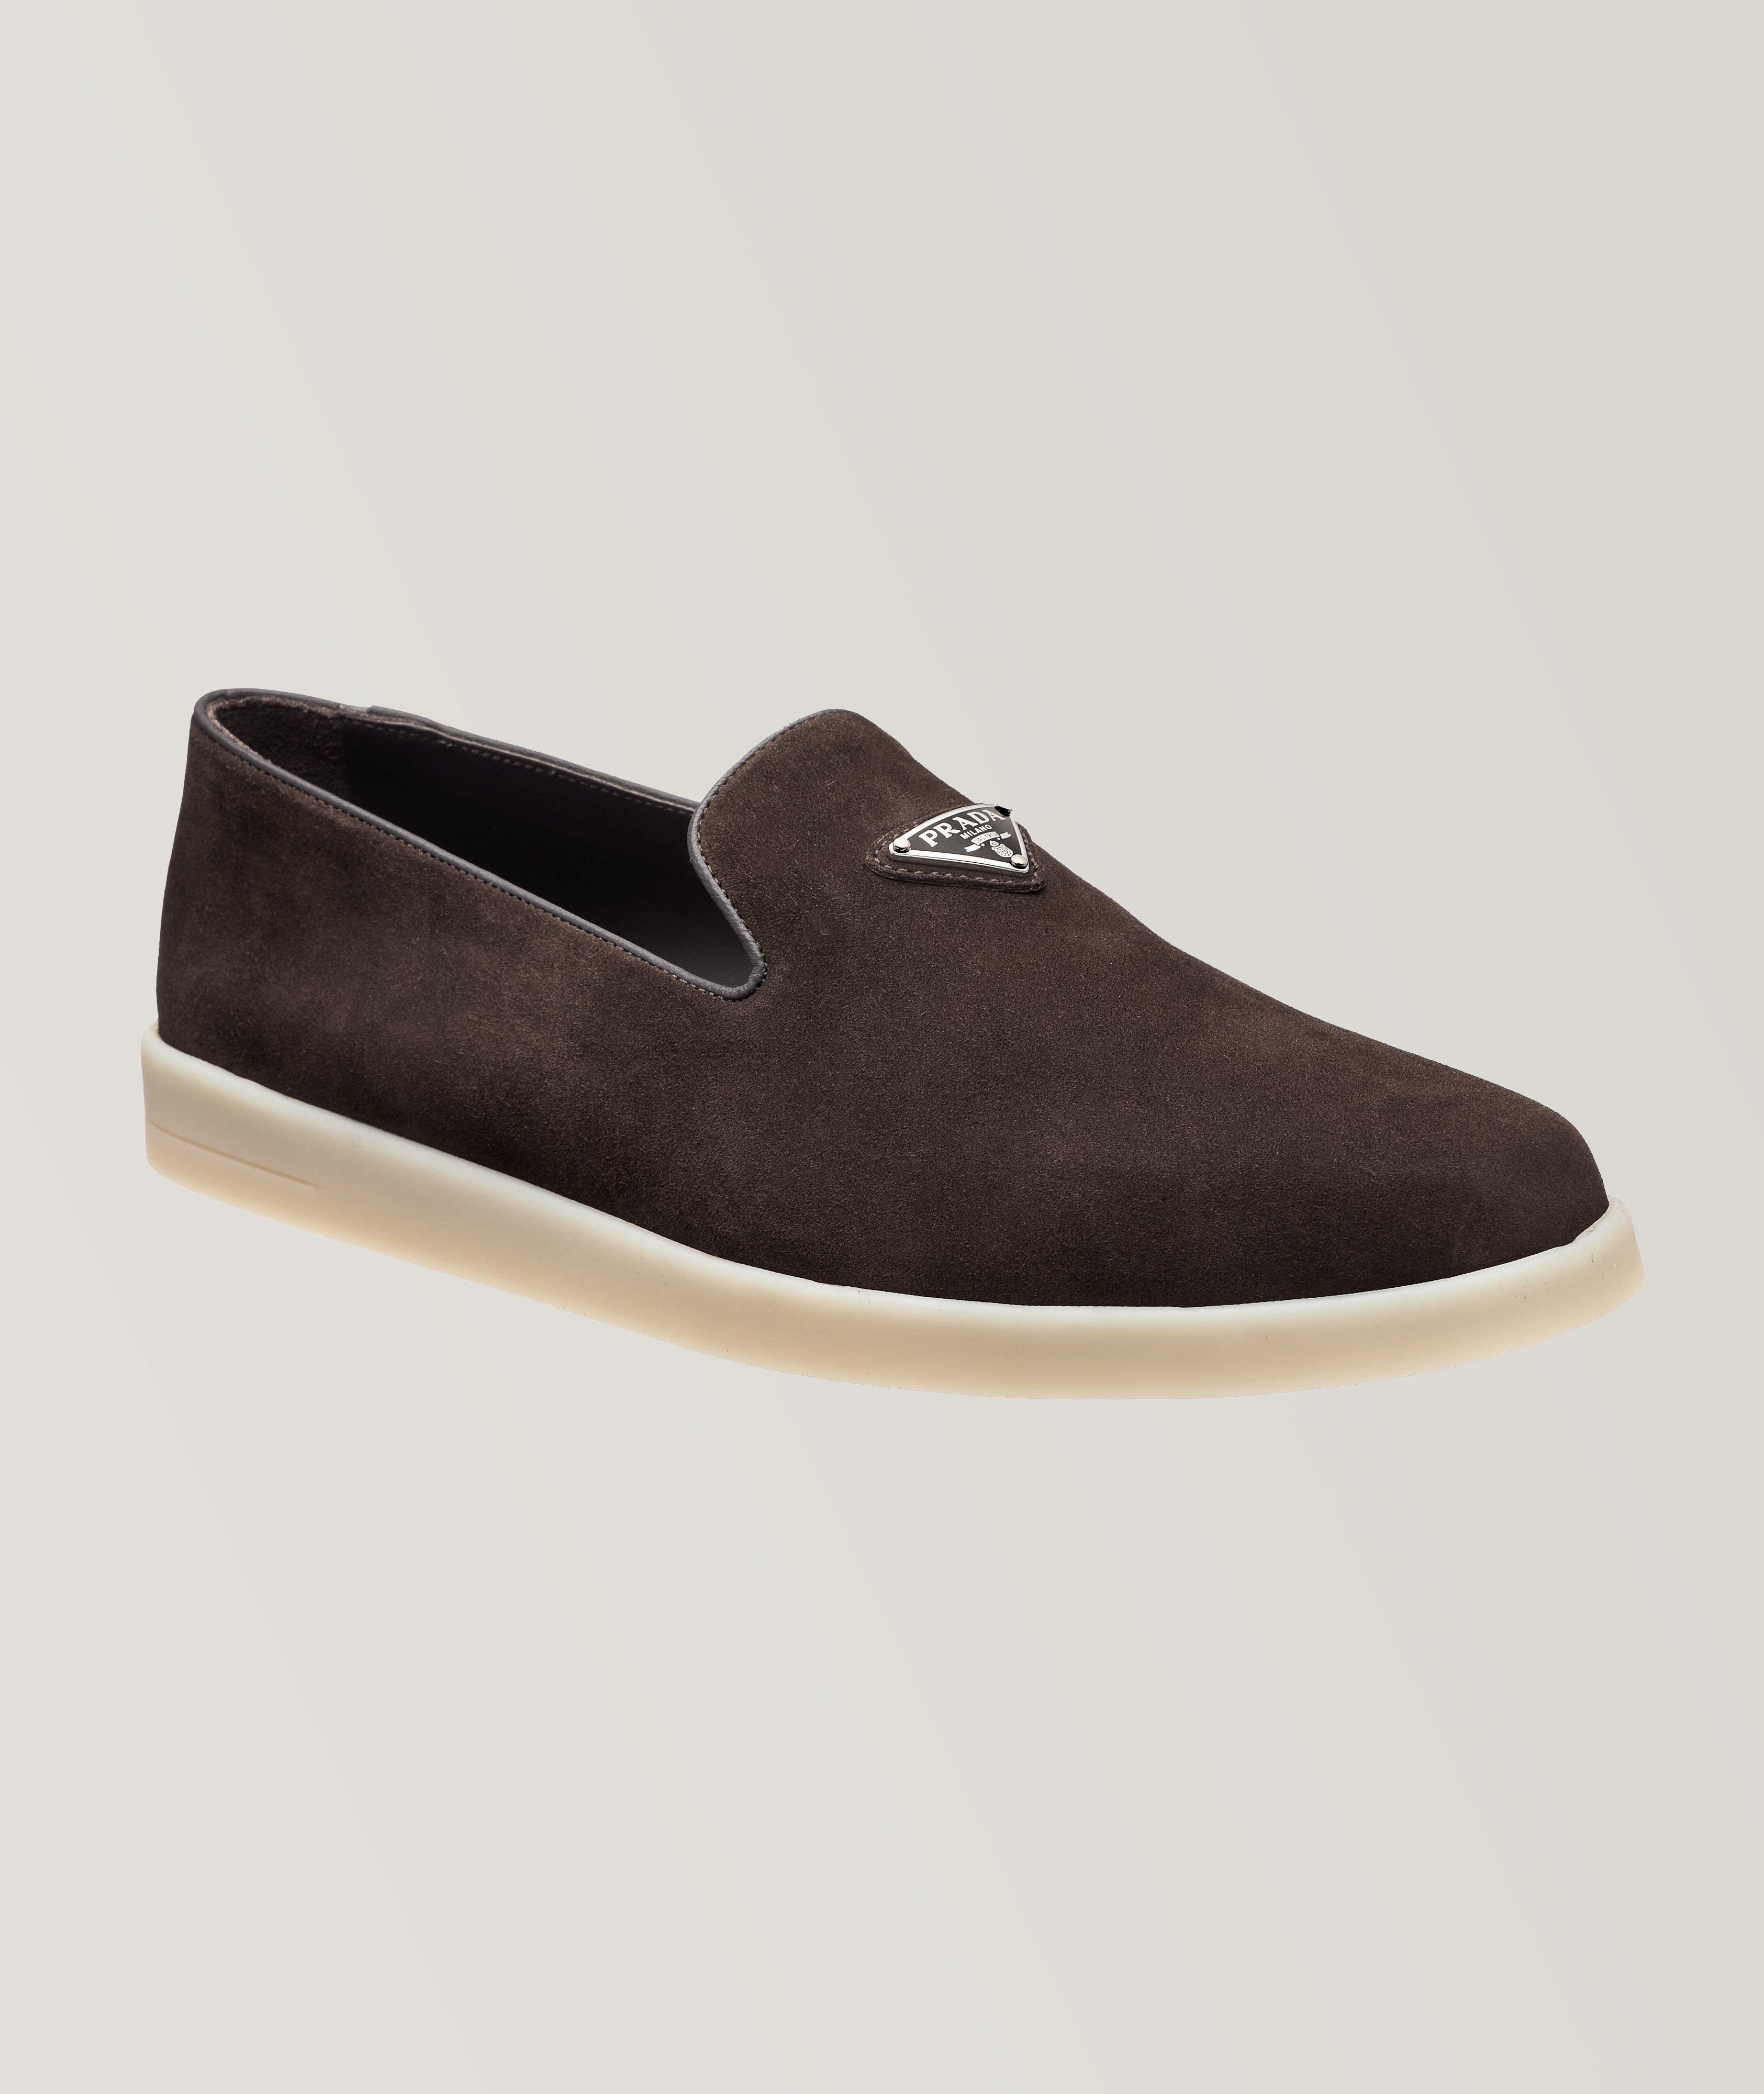 Logo Plaque Suede Loafers image 0